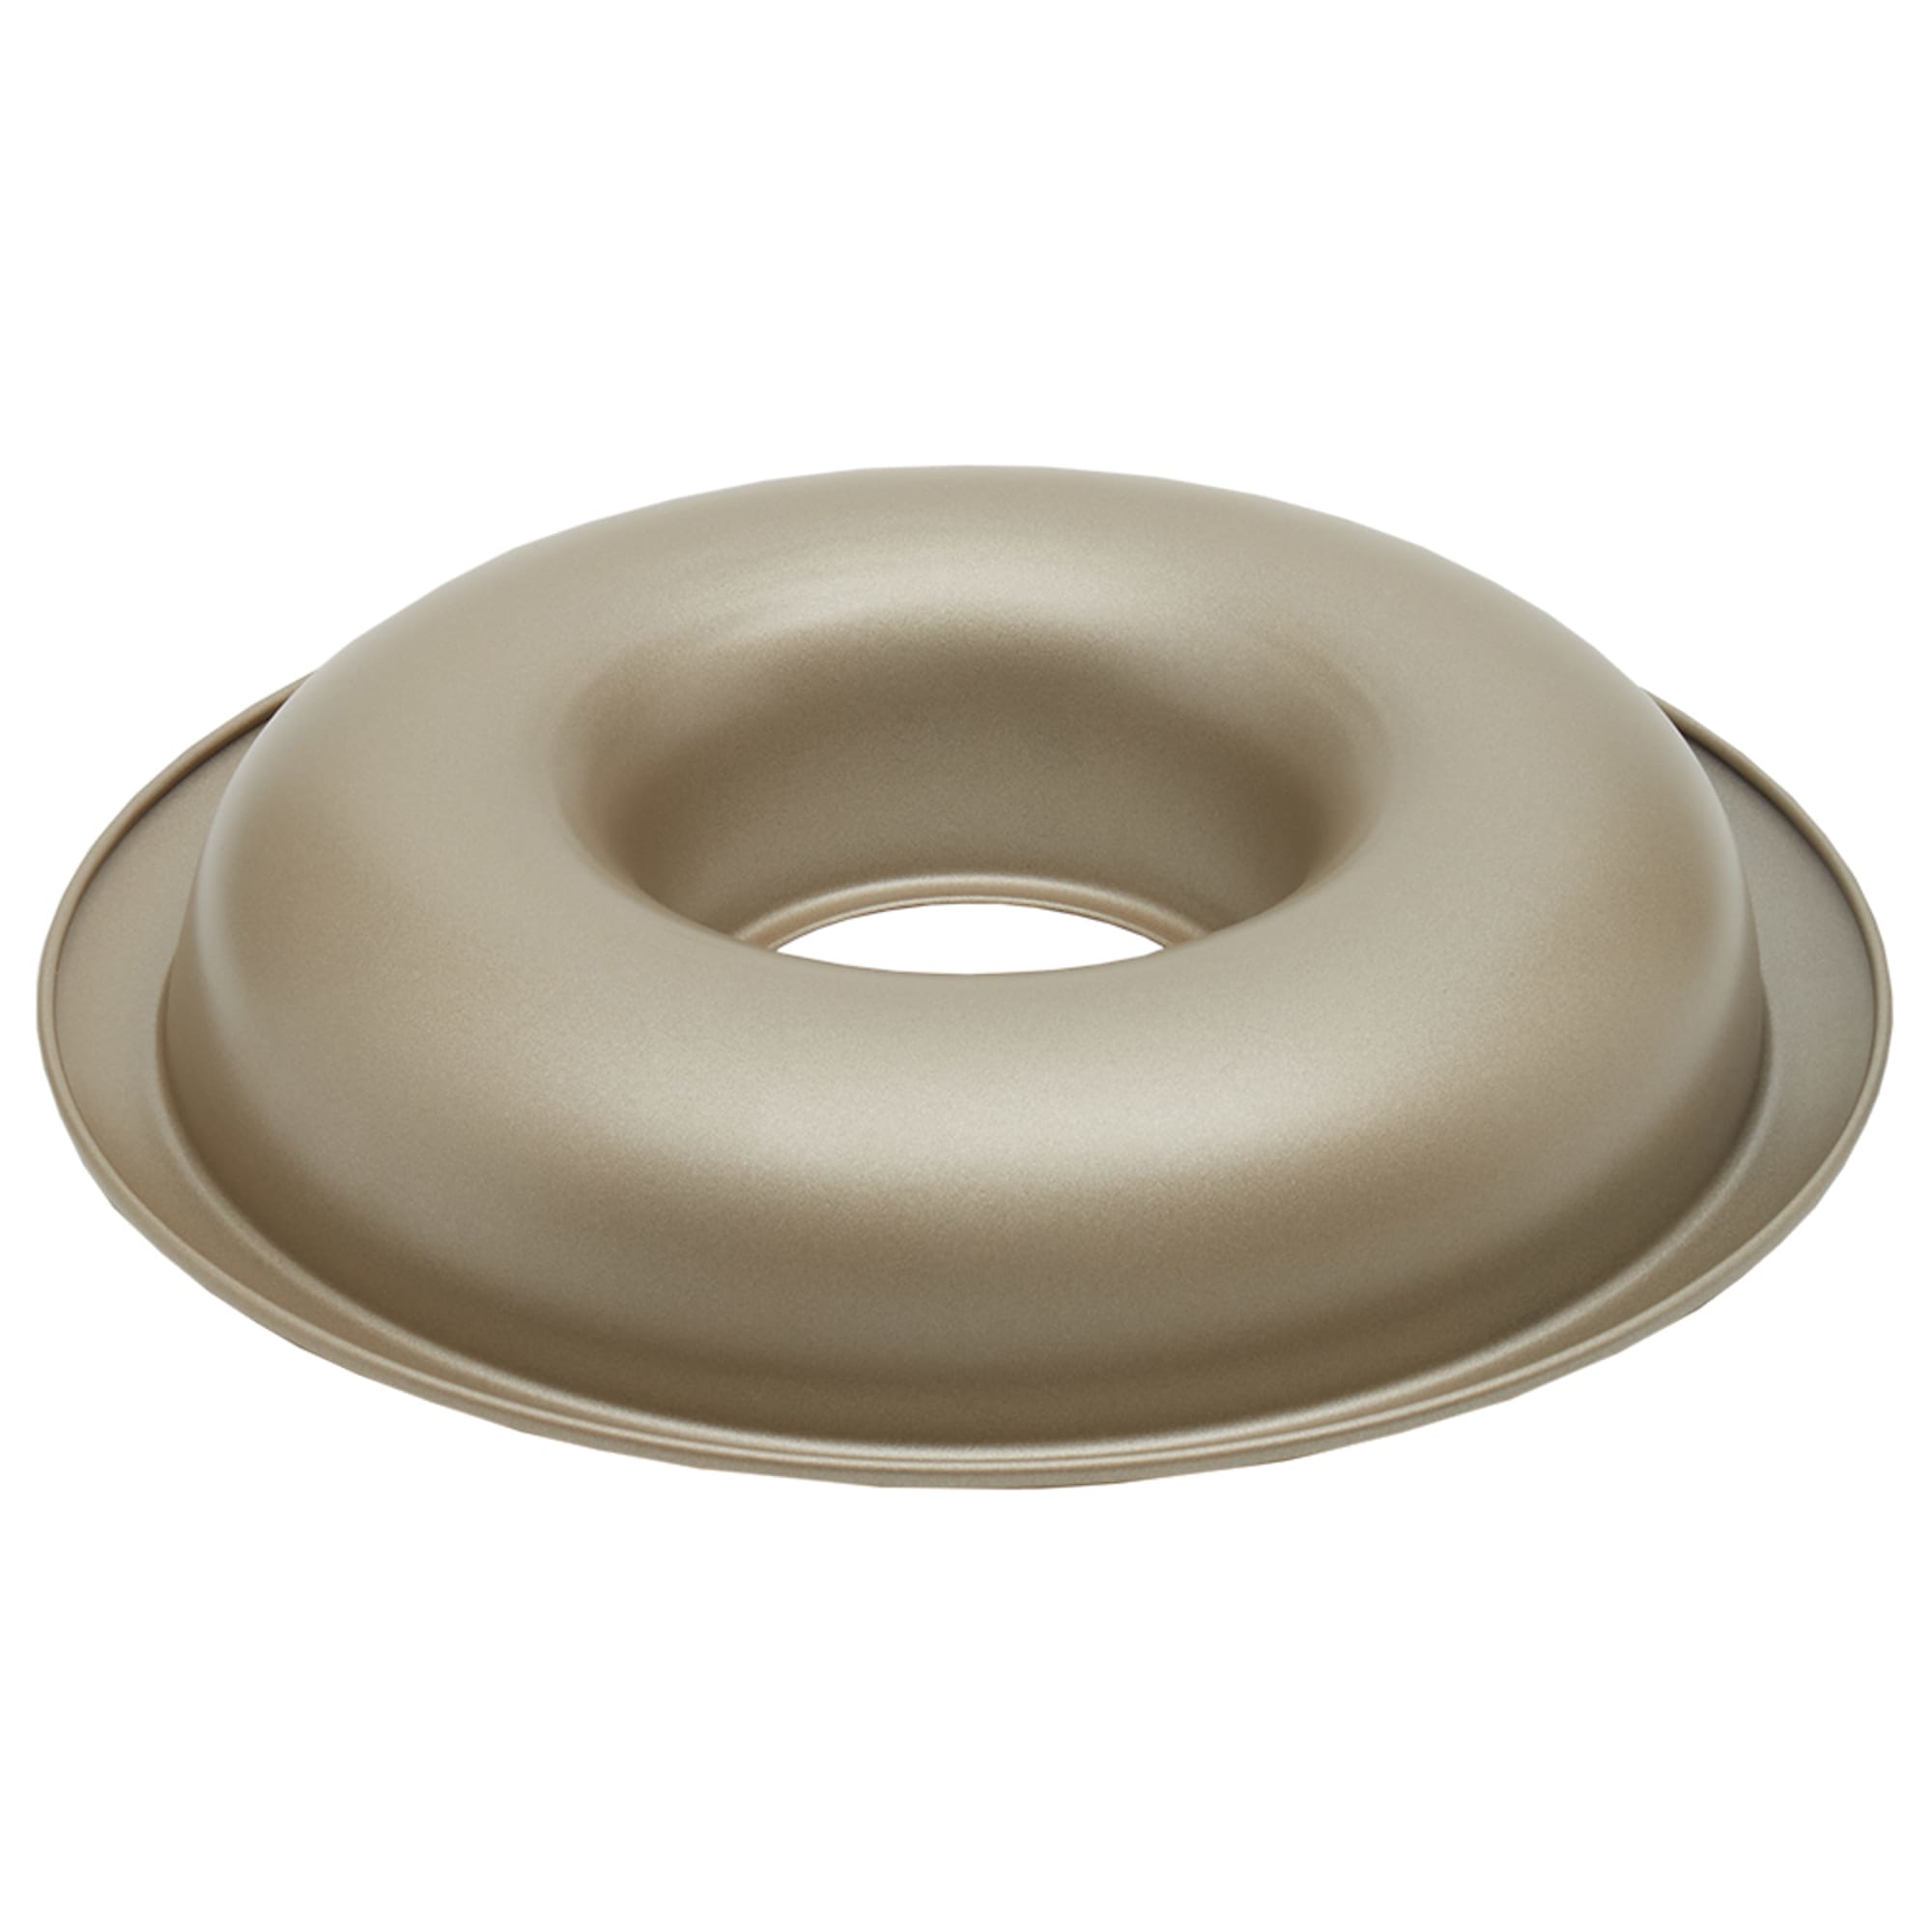 Home Basics Aurelia Non-Stick 12” x 2.4”  Carbon Steel Cake Ring, Gold $6.00 EACH, CASE PACK OF 12